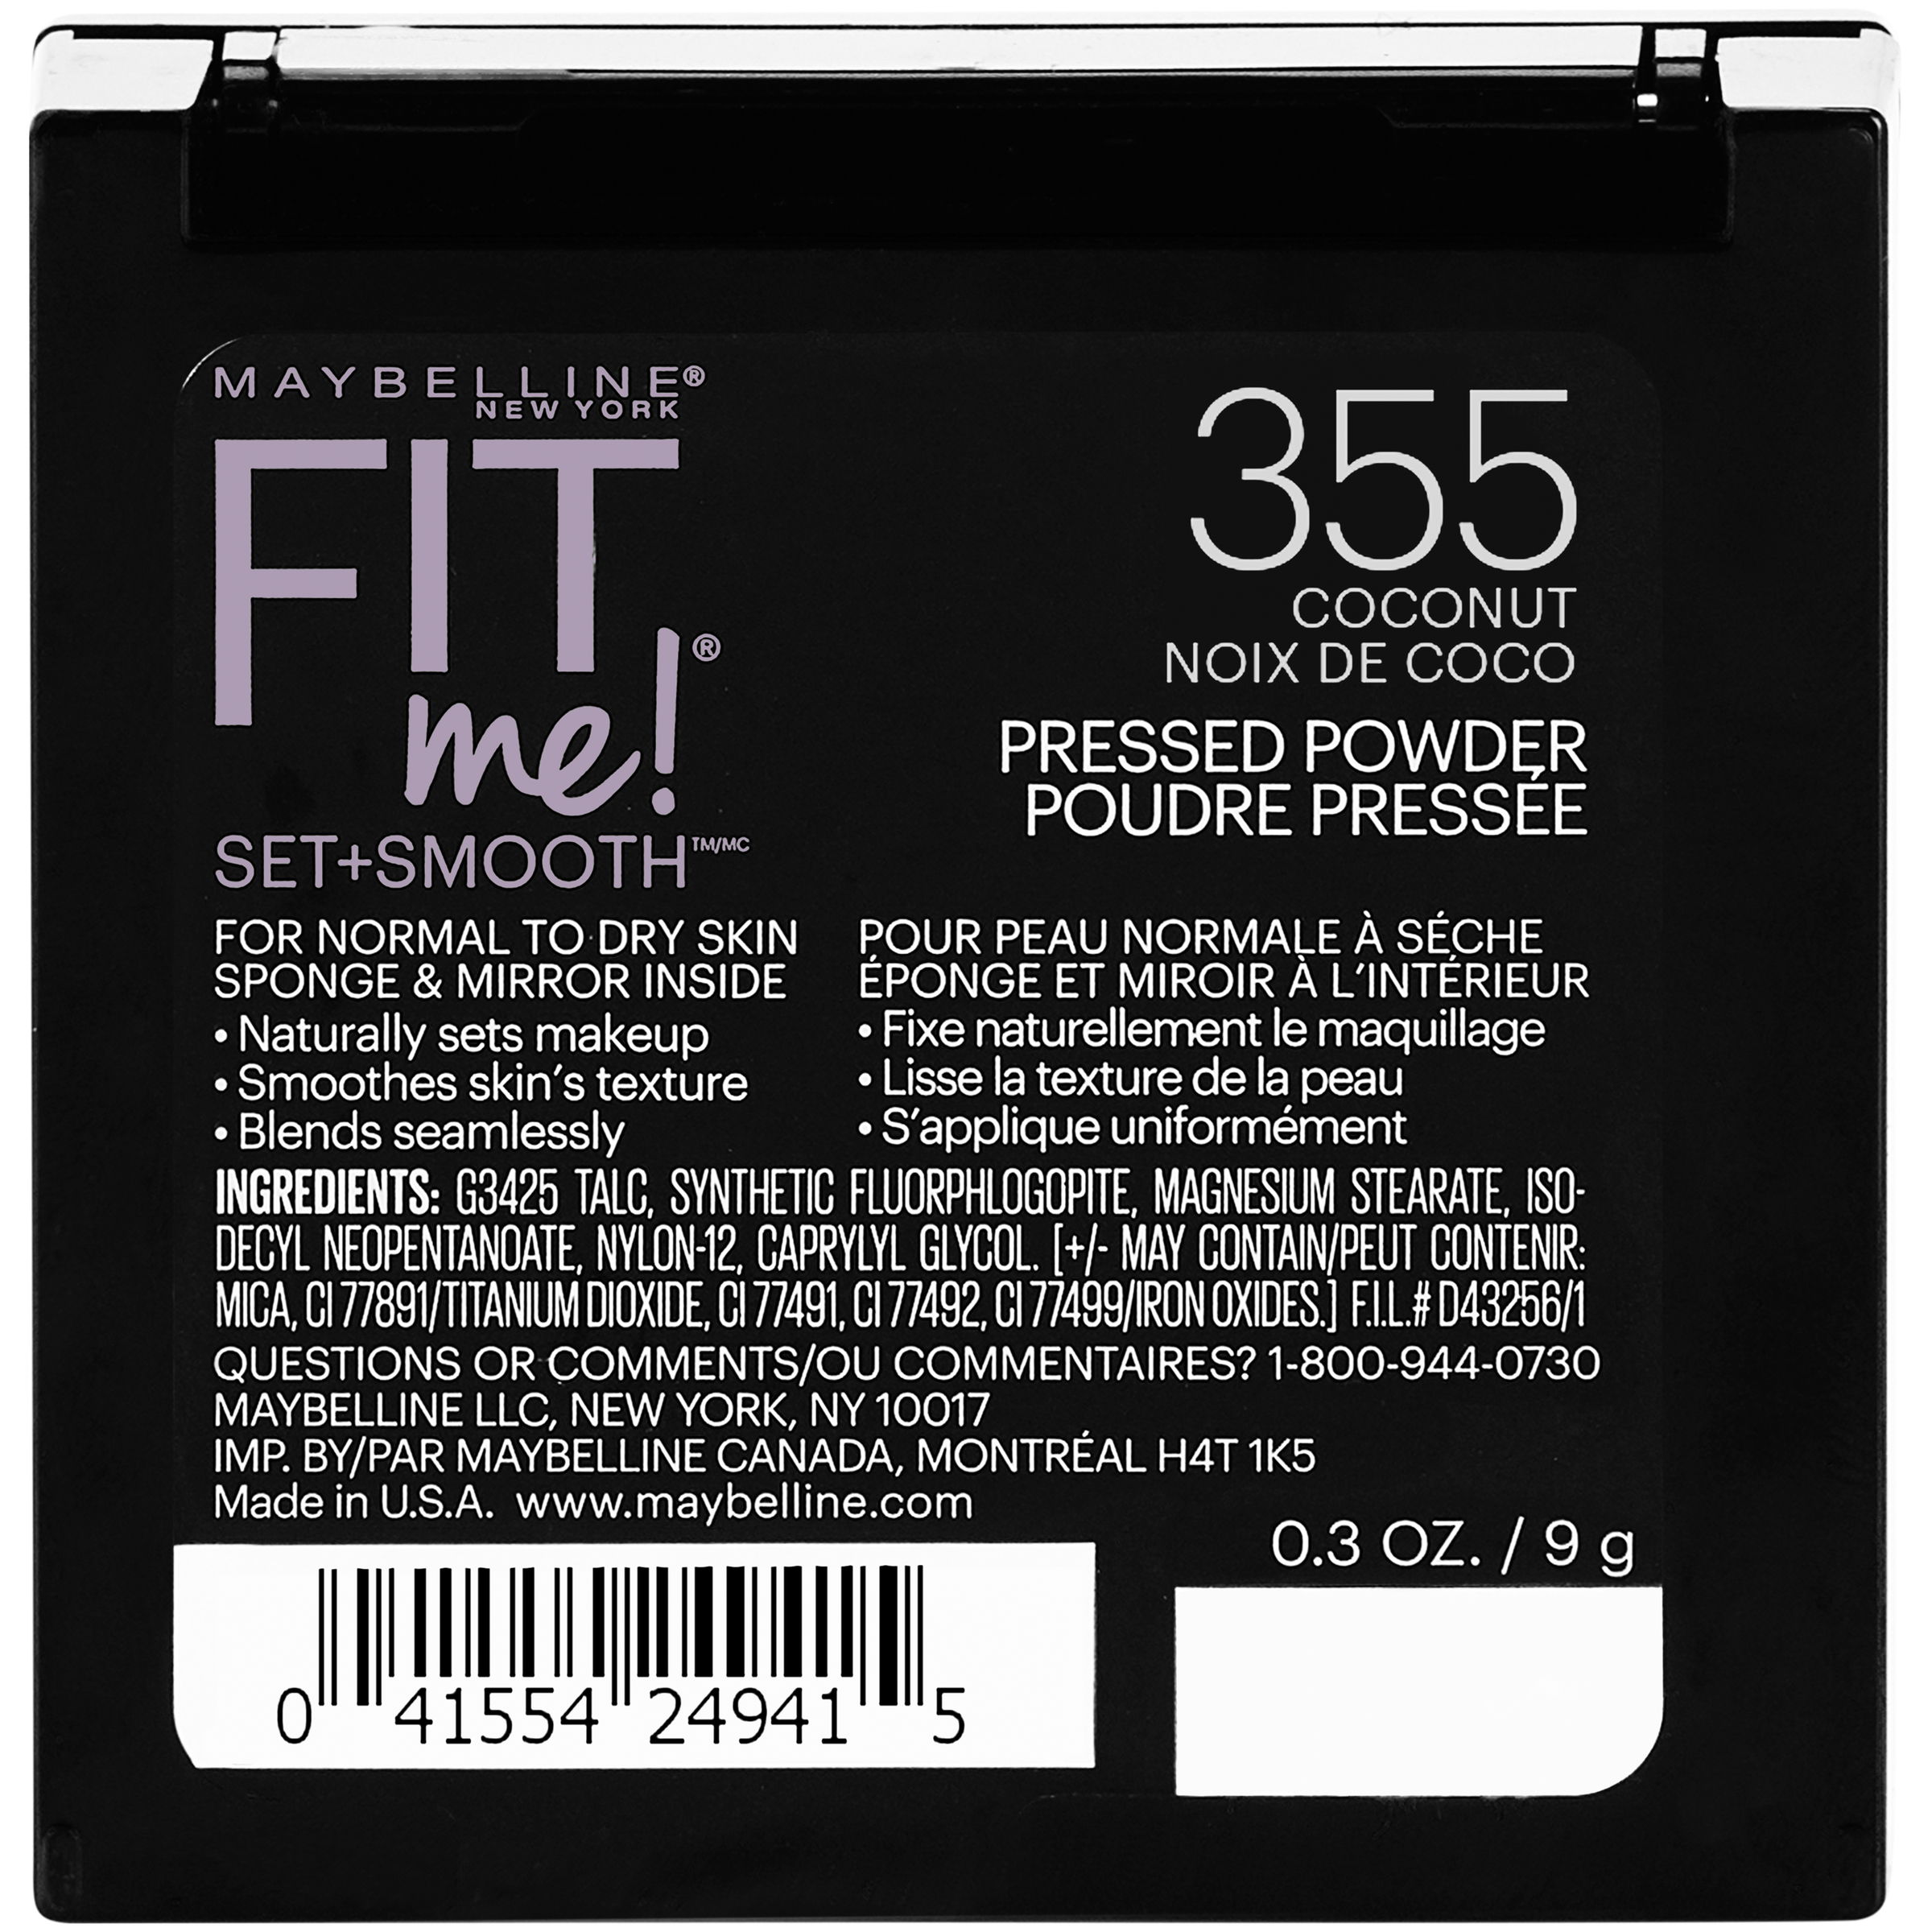 Maybelline Fit Me Set + Smooth Powder, Coconut - image 2 of 7